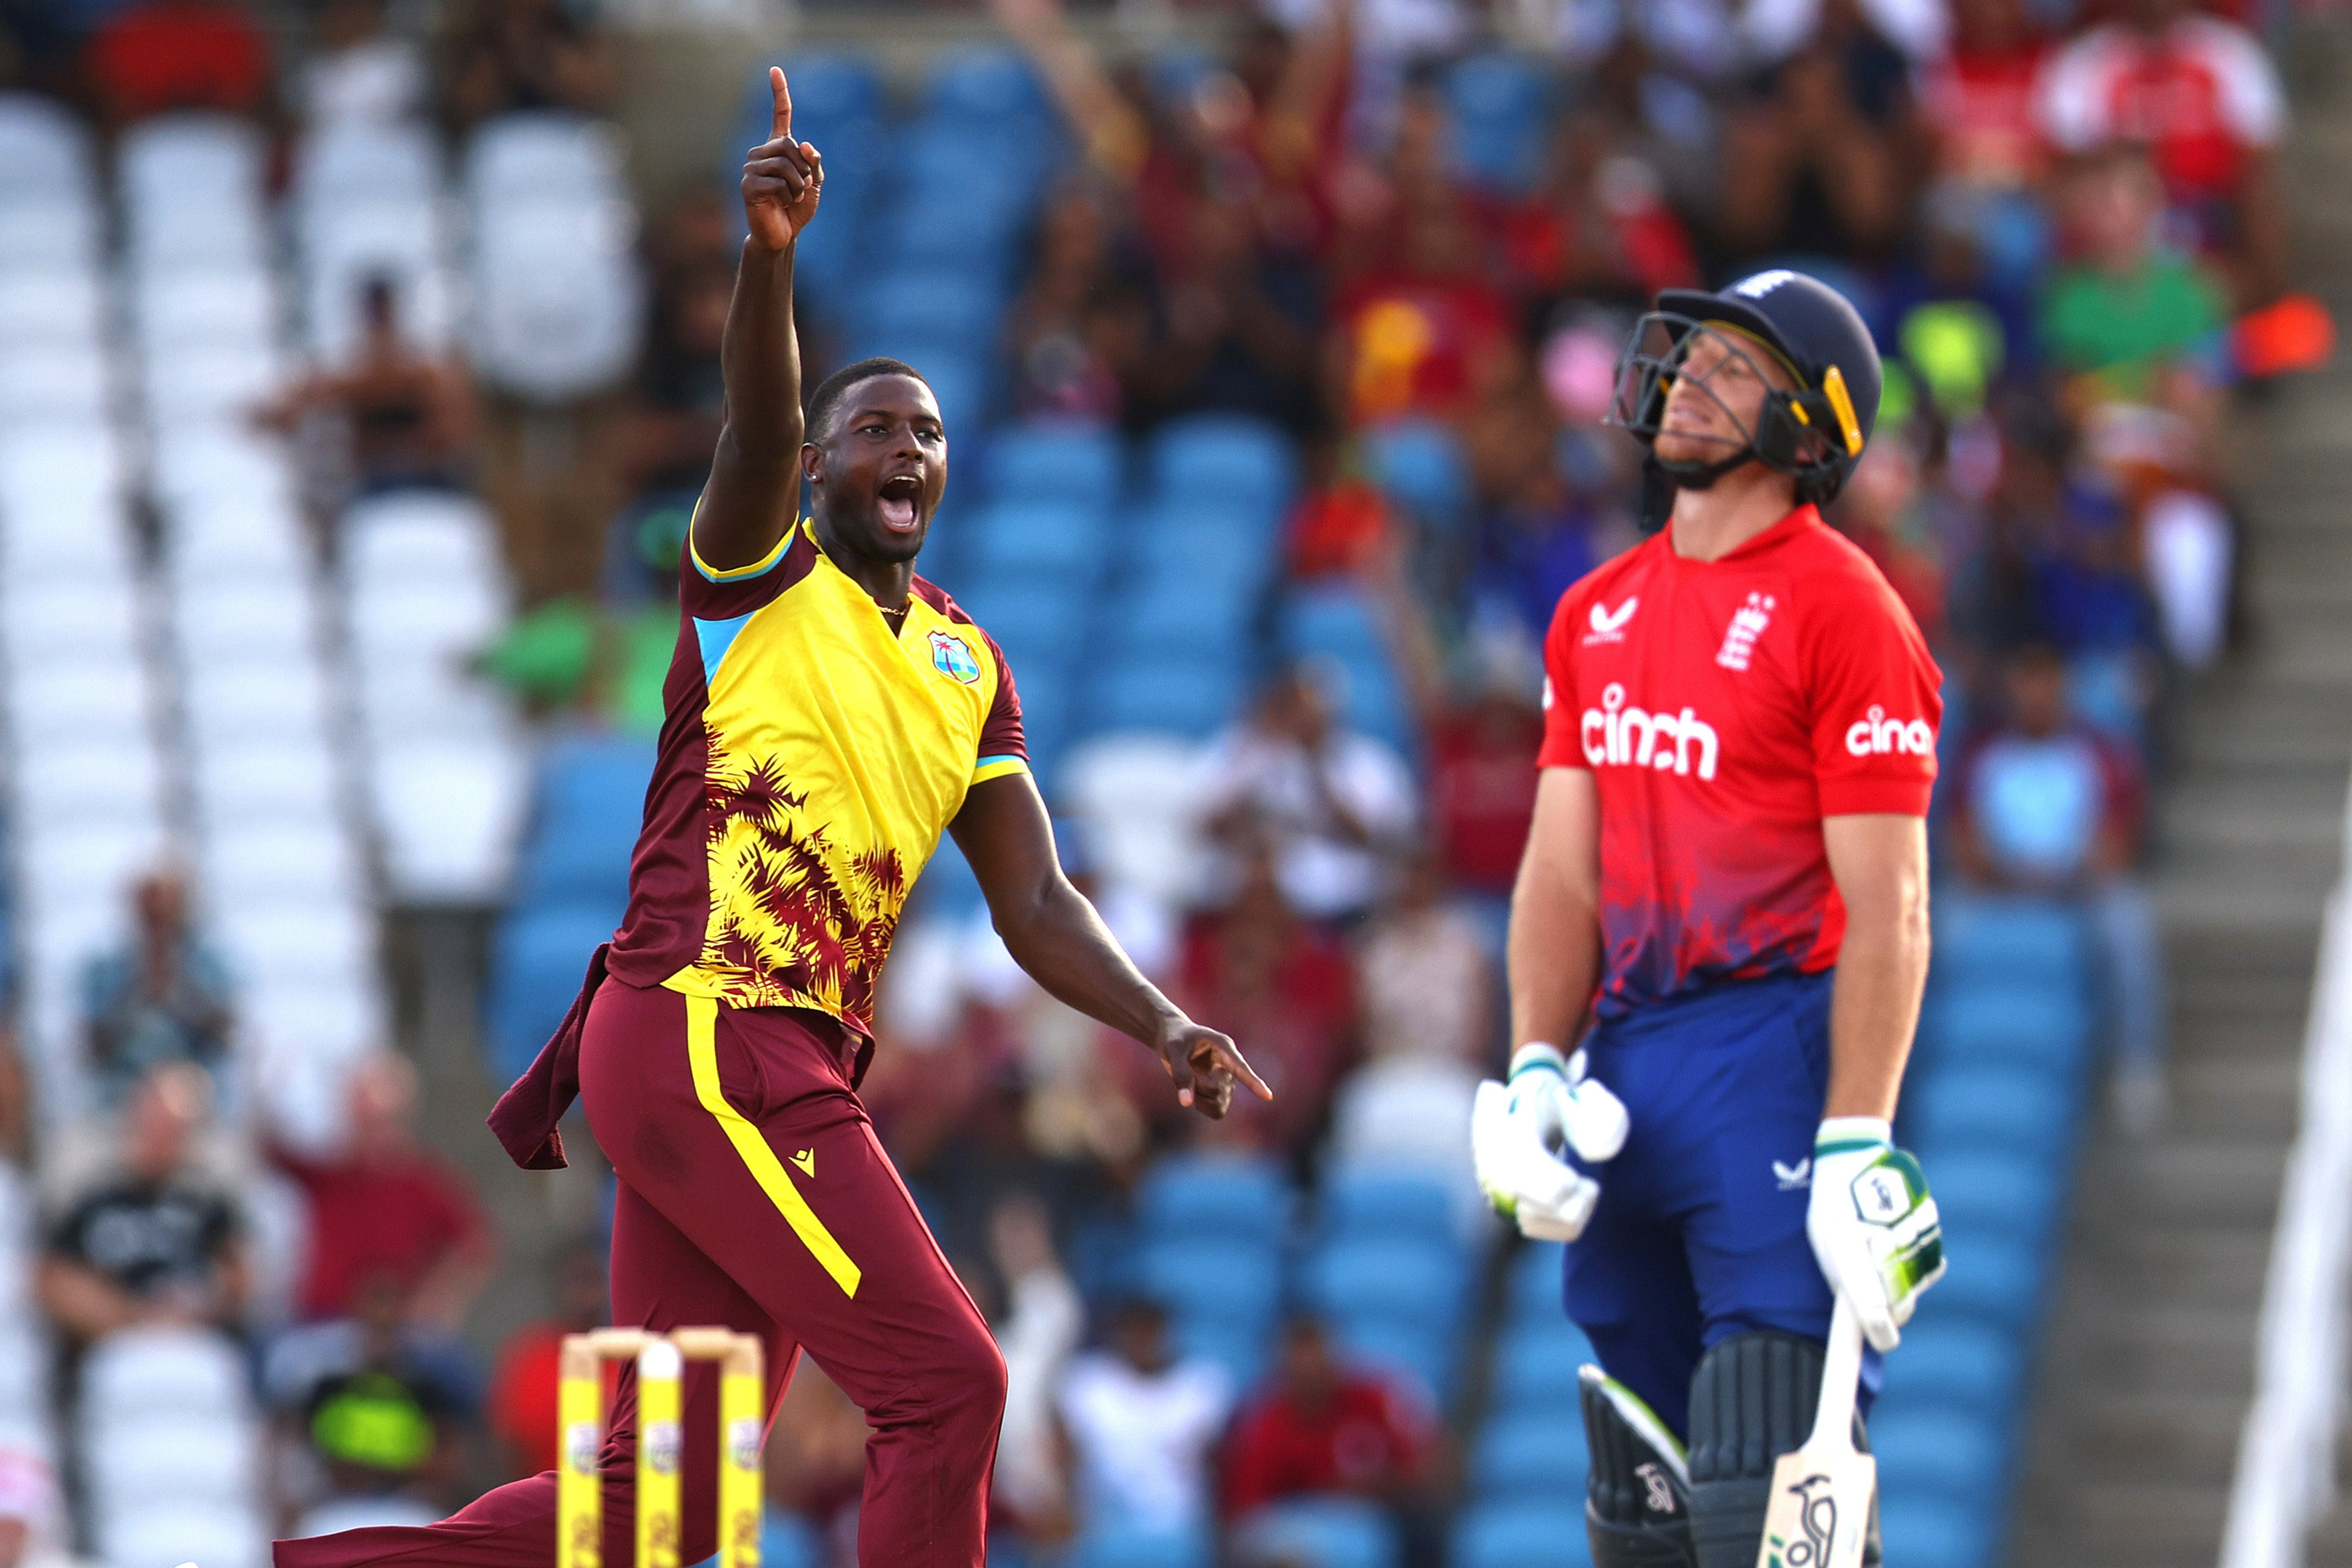 England lost the T20 series to West Indies